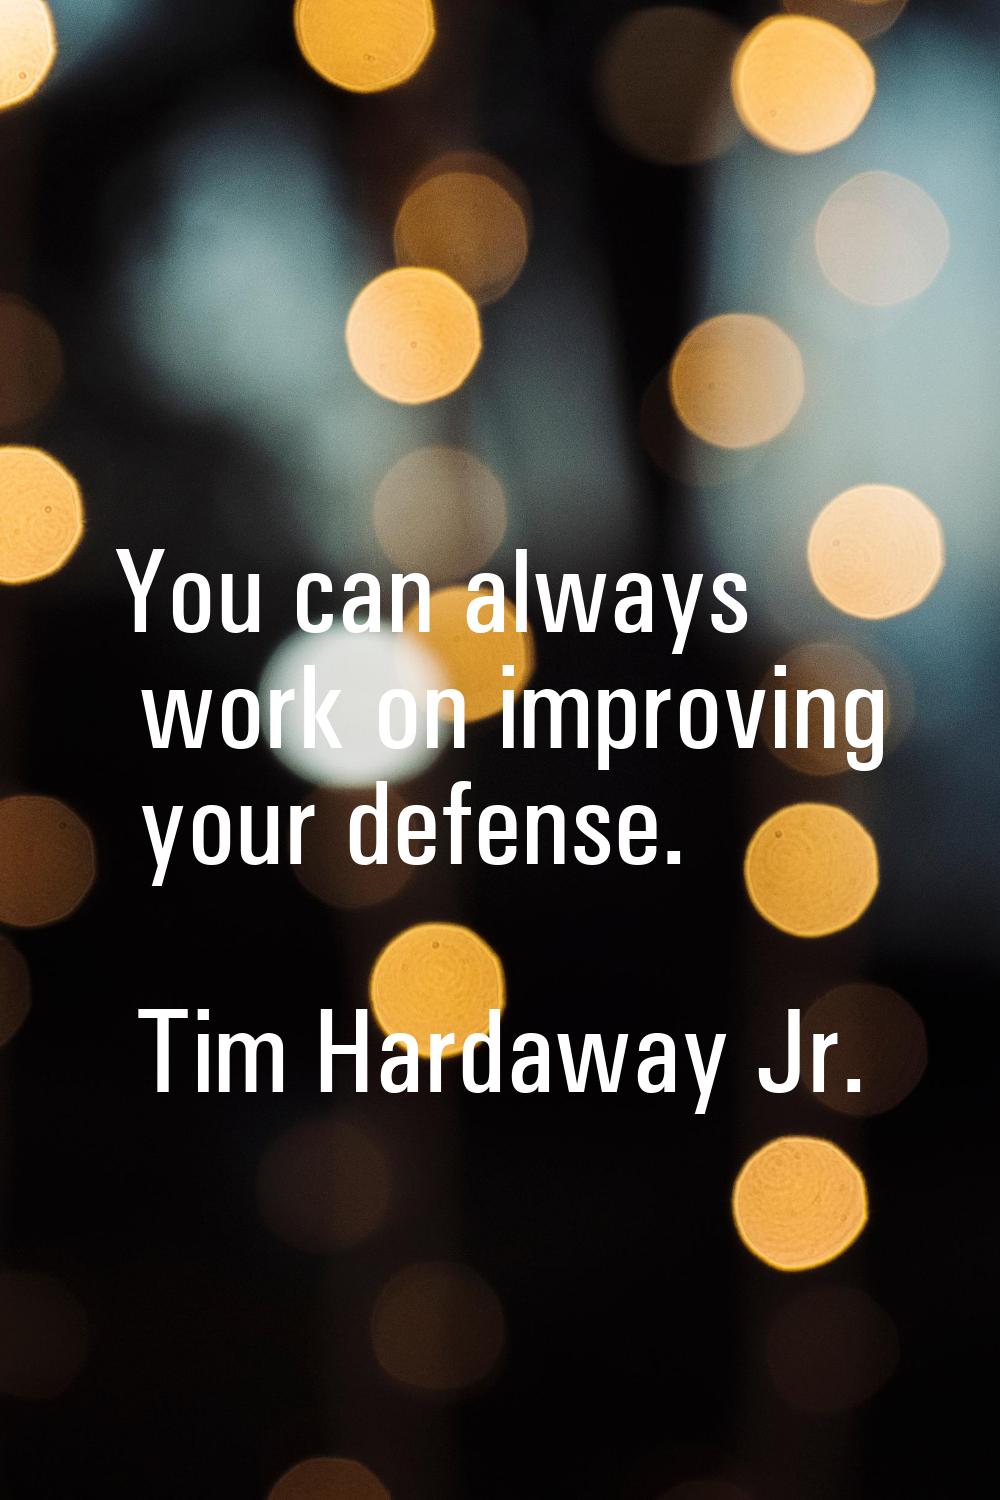 You can always work on improving your defense.